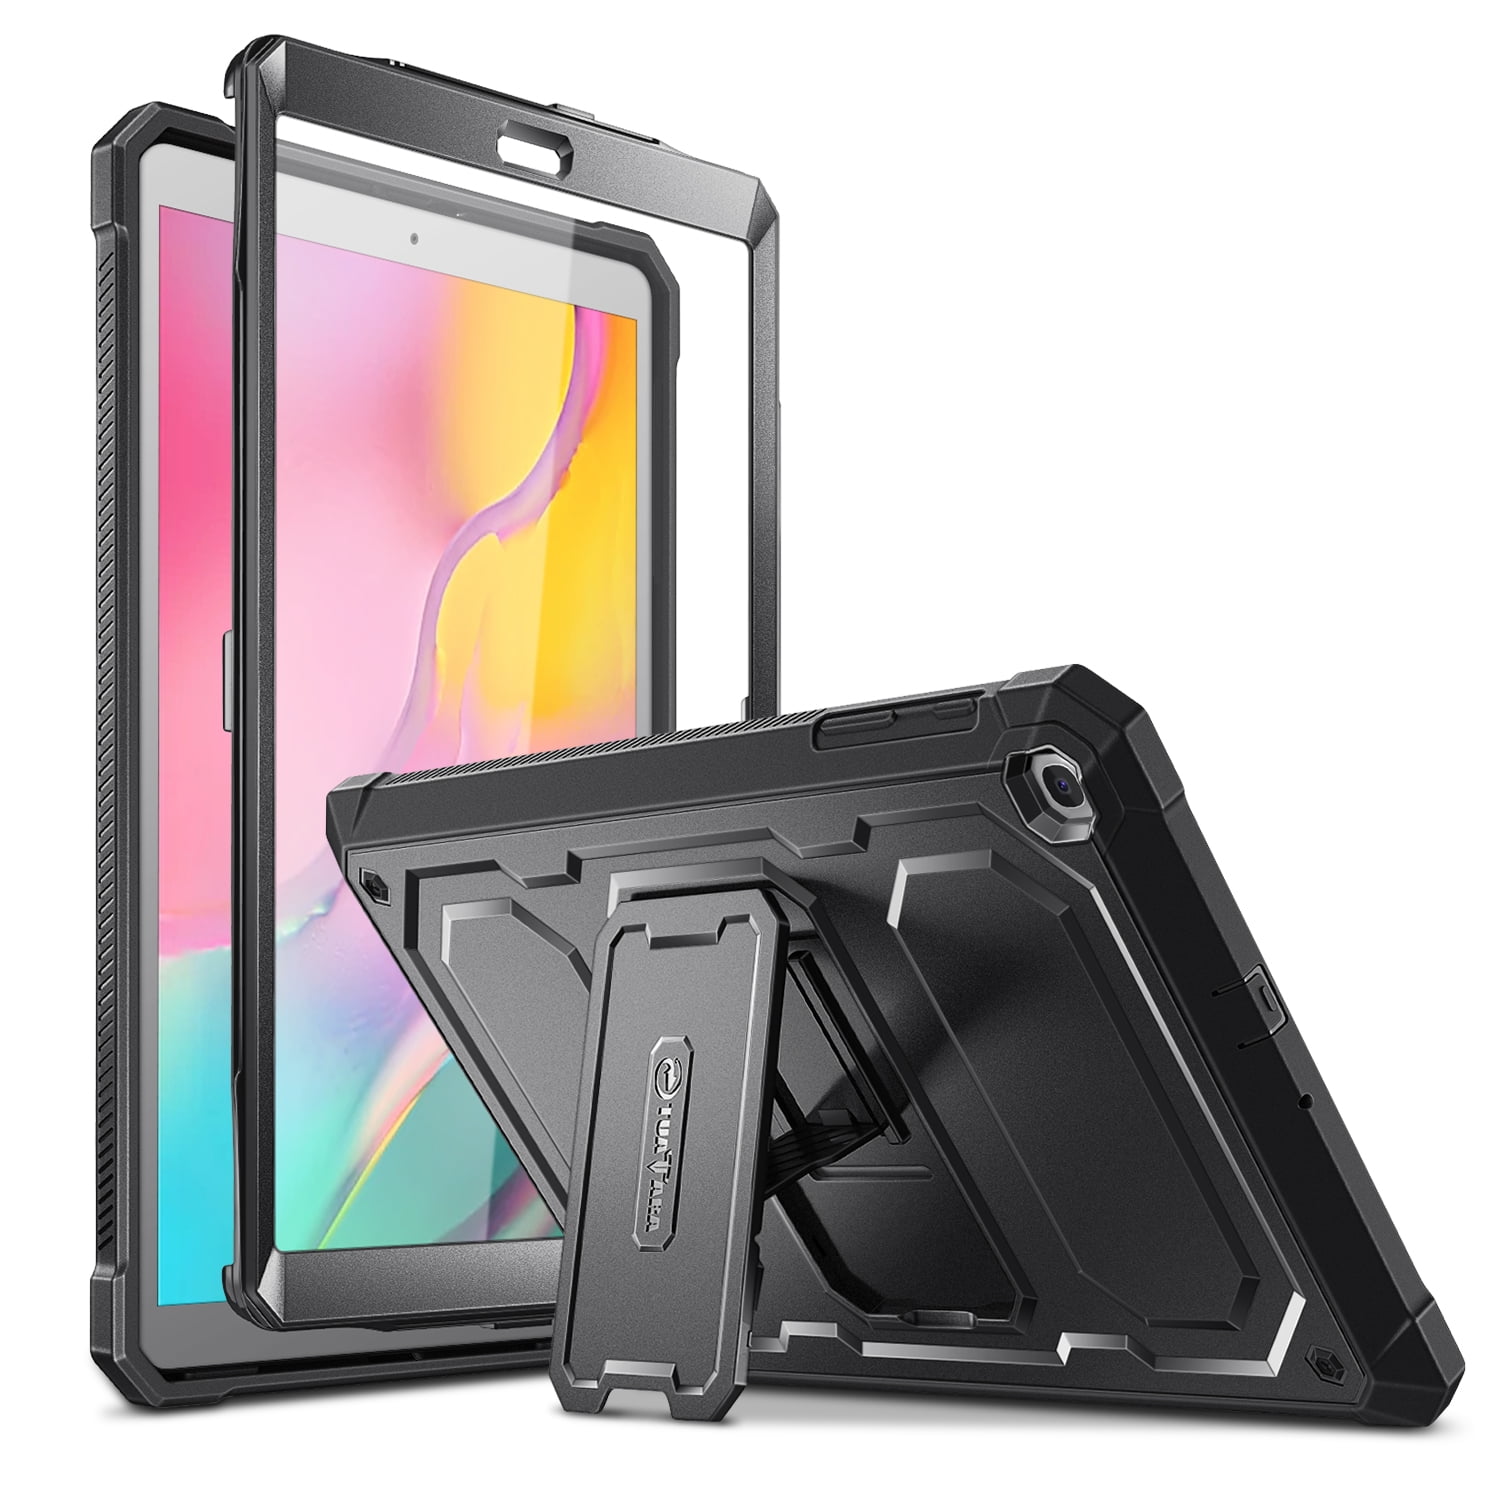 vloot Authenticatie neef For Samsung Galaxy Tab A 10.1 SM-T510 Case Grip Stand Shockproof Cover  Screen Protector - Walmart.com